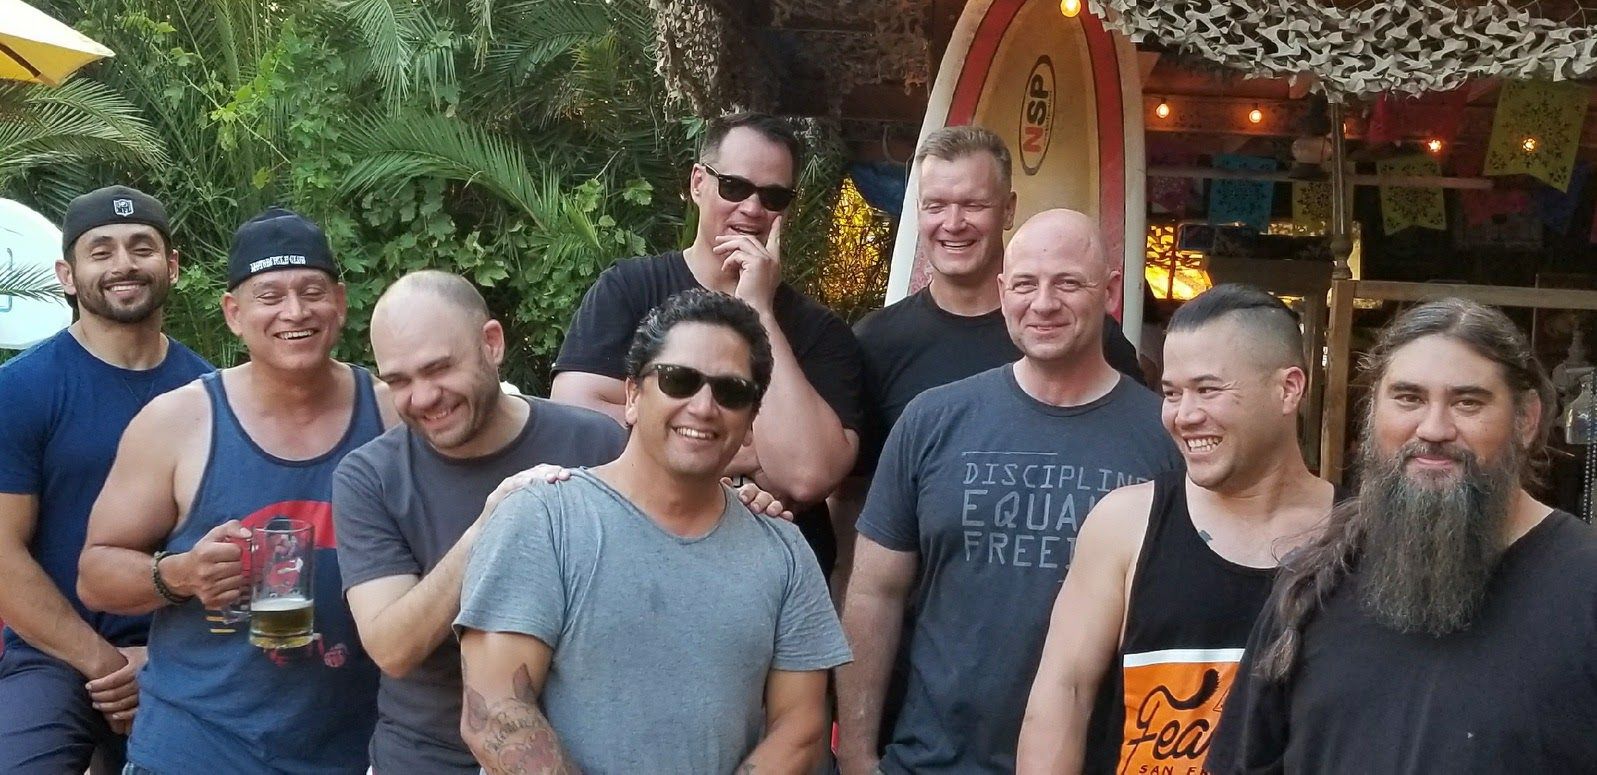 A group photo featuring Chad Armstrong (back row with sunglasses), who formed the nonprofit Forgotten Fifteen Foundation